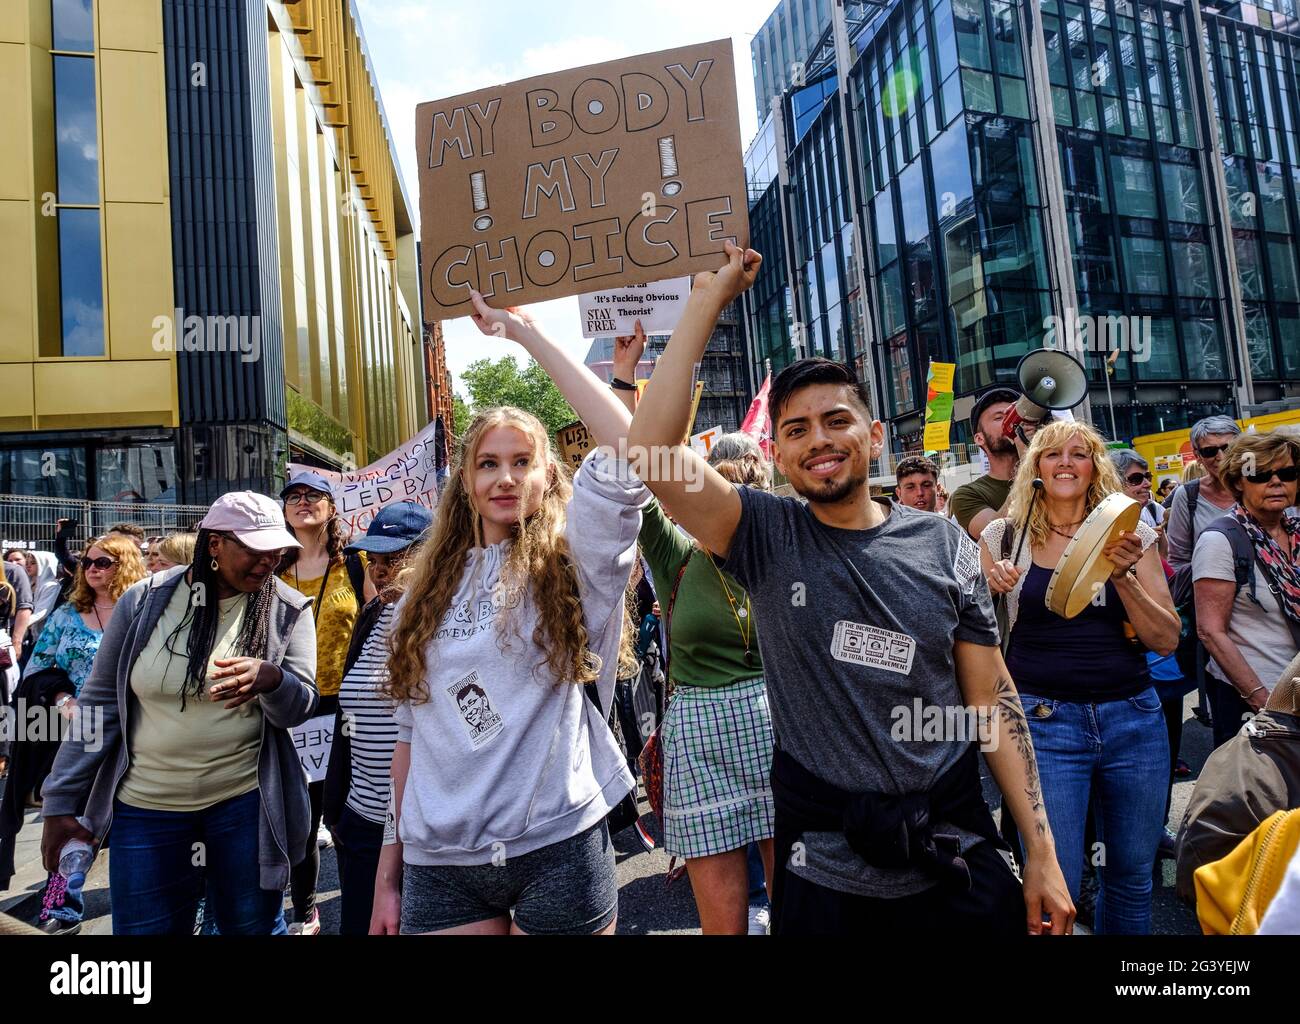 Anti-Vax anti-lockdown protesters march through central London protesting the governments Covid measures including vaccination passports and restrictions on opening lockdown.May 29 2021 Stock Photo